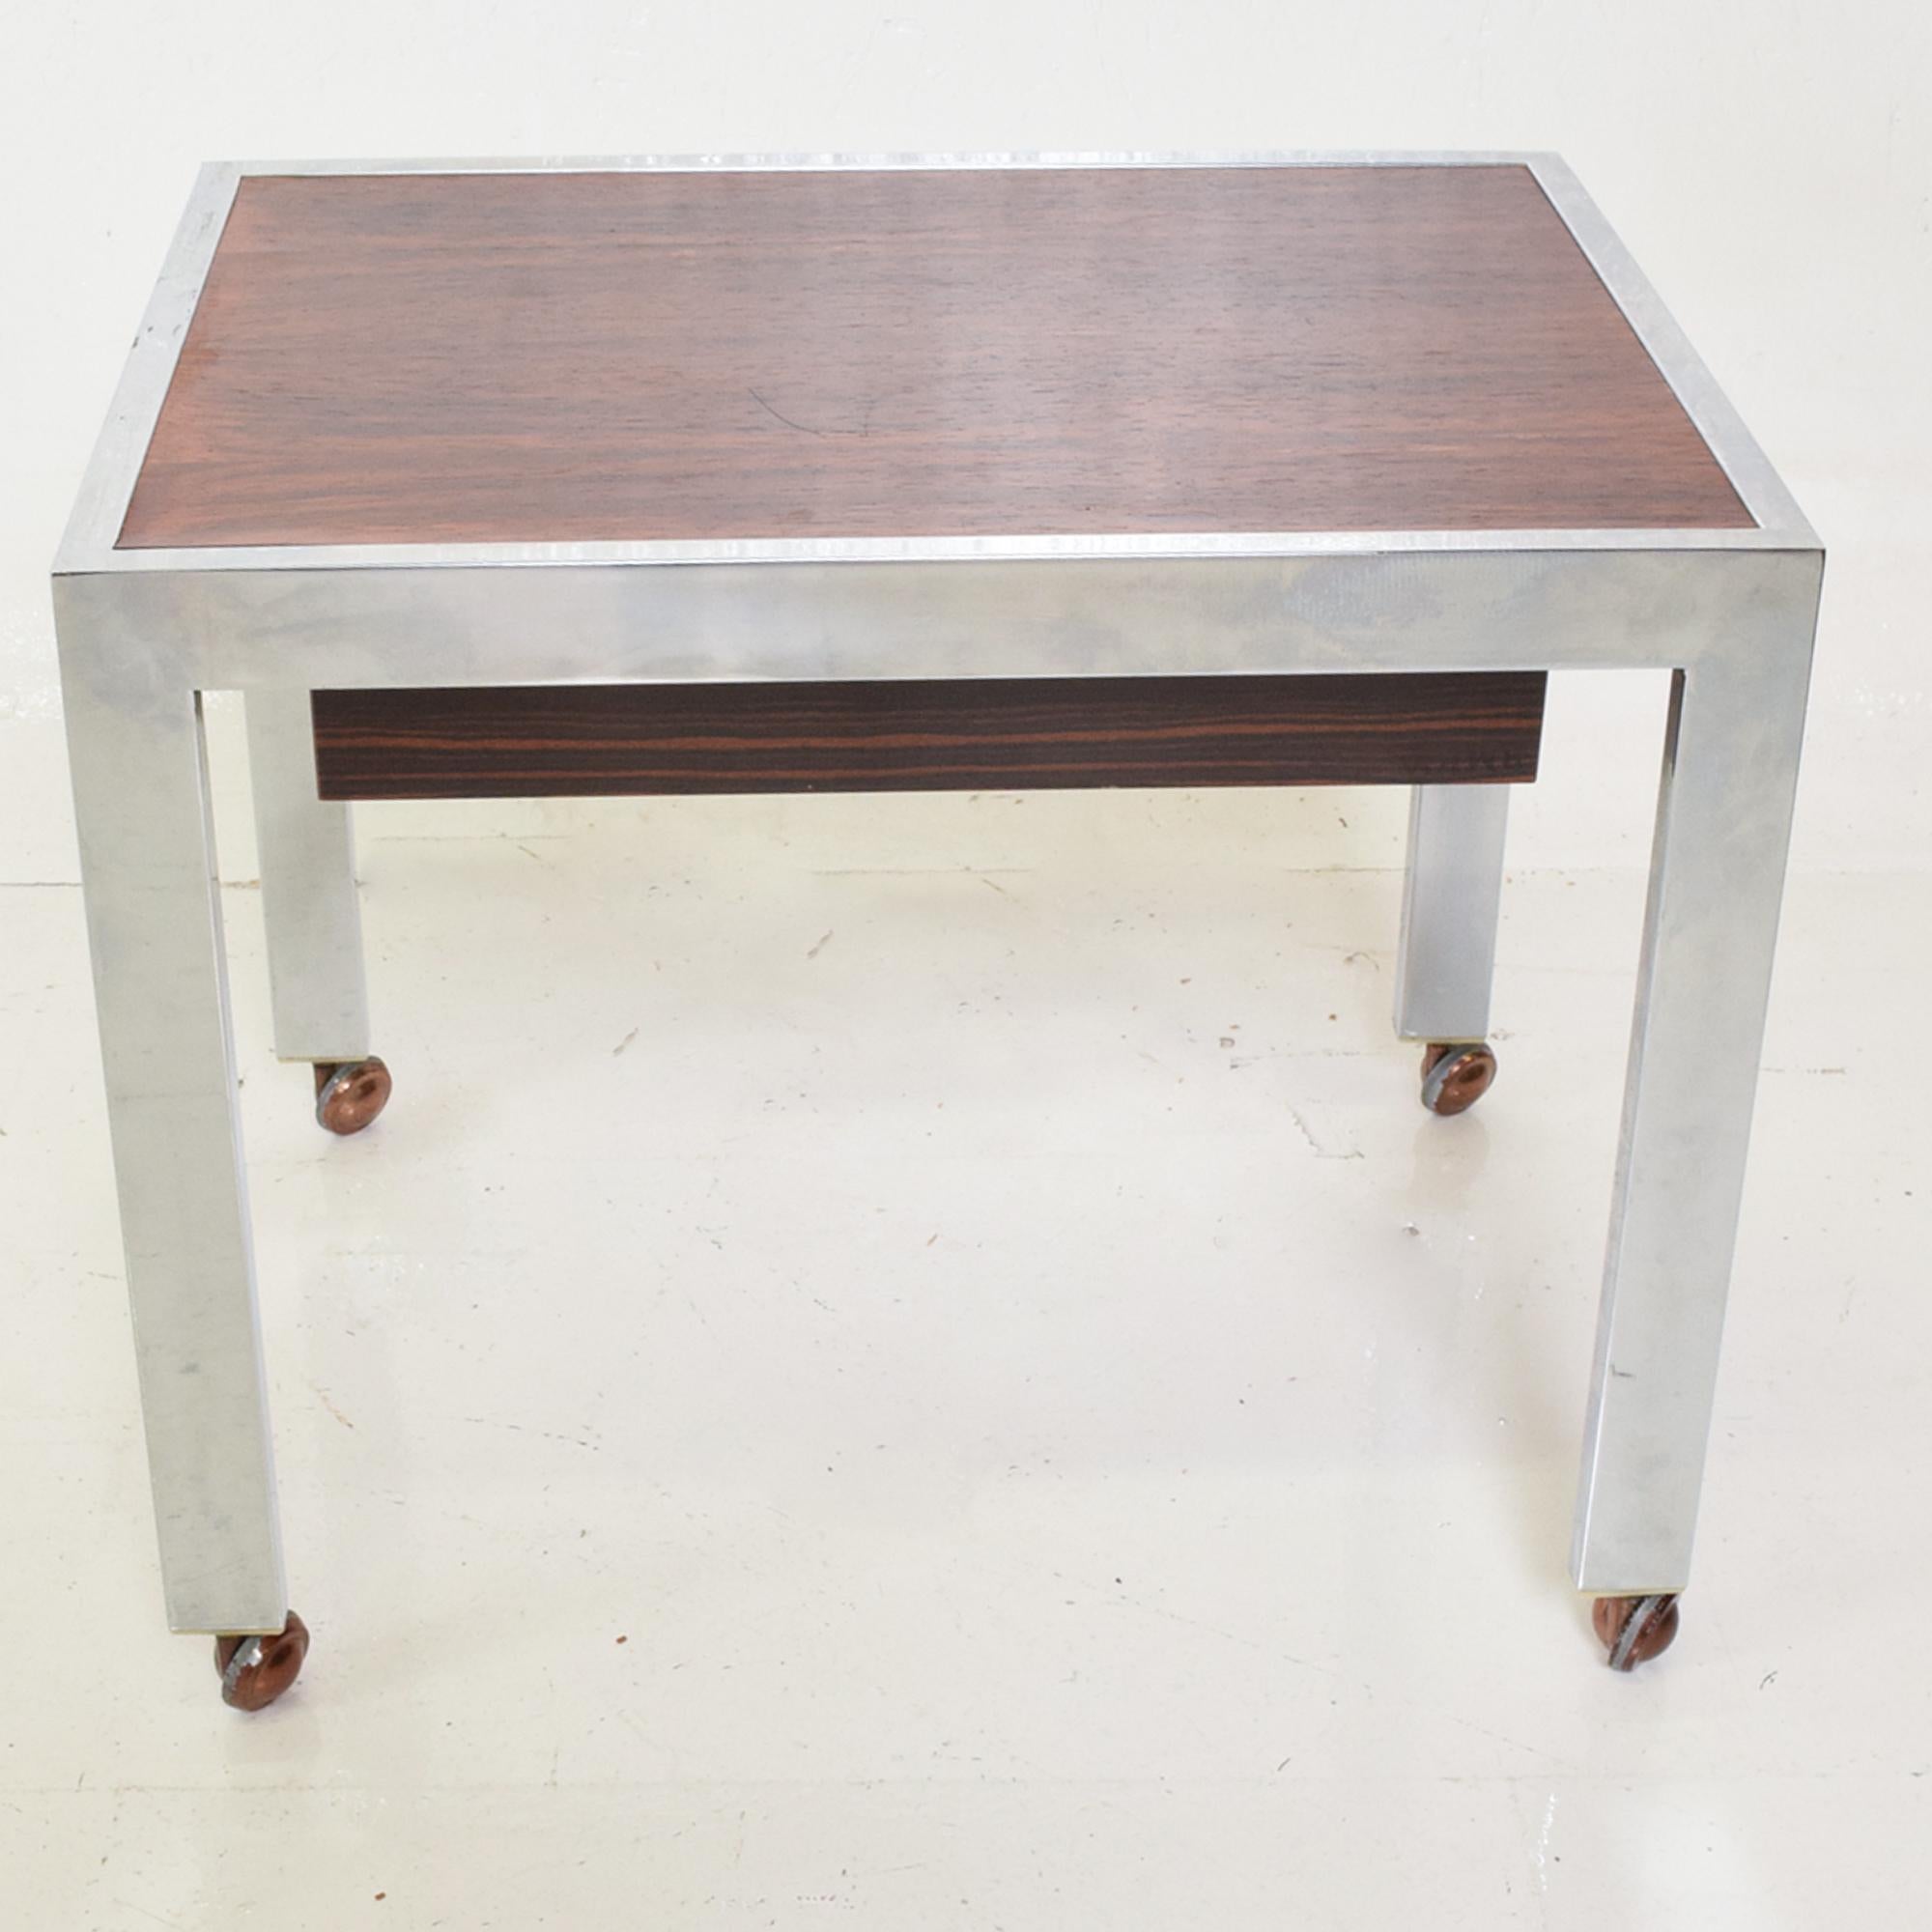 Scandinavian Danish modern sleek rectangular side table rosewood & chrome on rolling casters
Single recessed rosewood drawer. Denmark circa 1960s. Unmarked. Reminiscent of Milo Baughman design.
Dimensions: 20 x 15 x 16.75 H, Drawer 2.25 H x 13.5 D